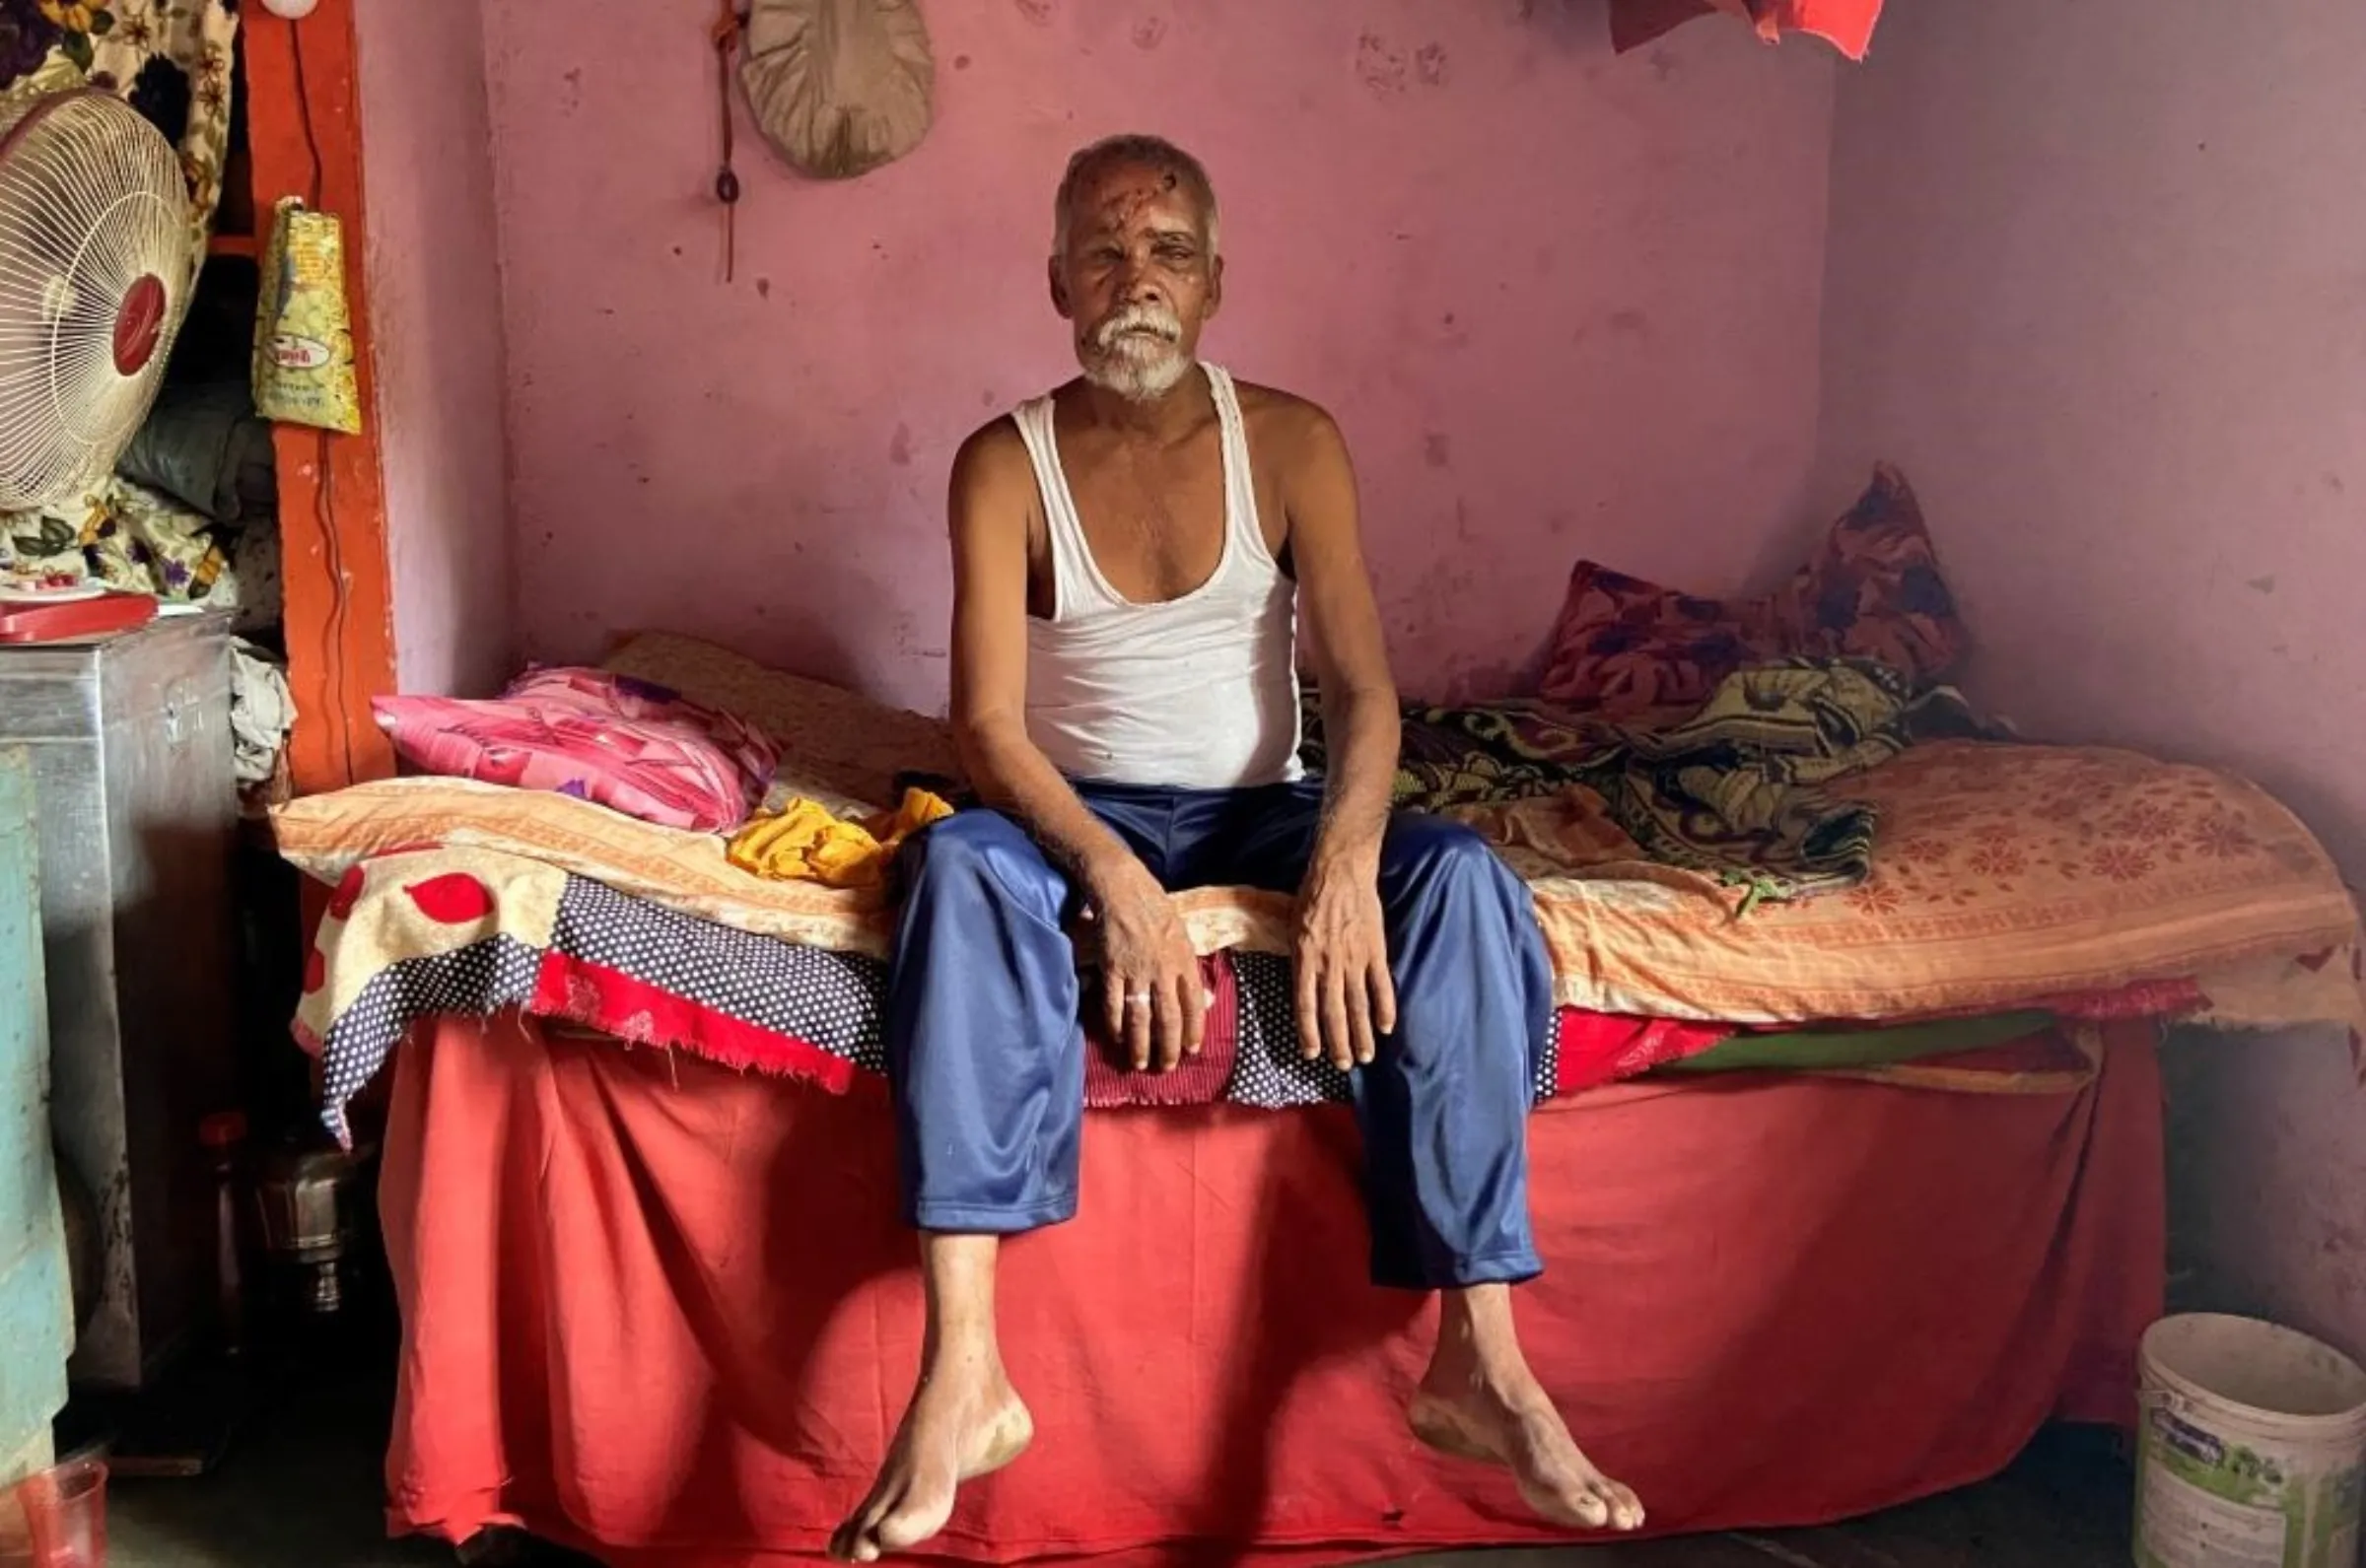 Bear attack victim Suresh Shankar Khiradkar poses for a picture at home in Payali Bhatali village in Chandrapur, India, August 19, 2021. Thomson Reuters Foundation/Roli Srivastava